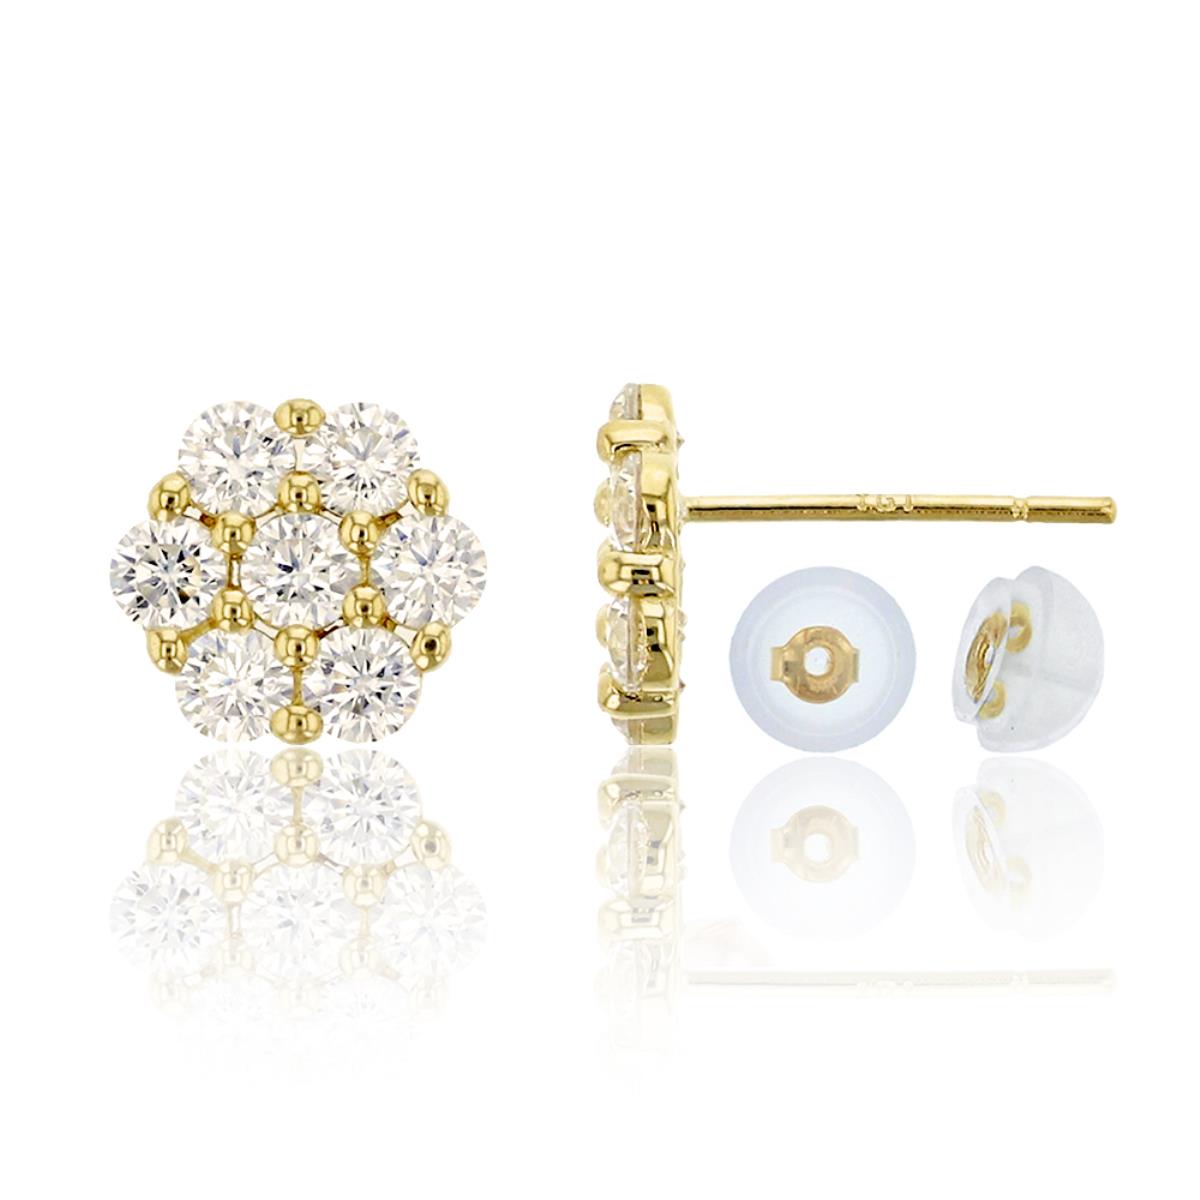 10K Yellow Gold Pave 8mm Cluster CZ Stud Earring & 10K Silicone Back